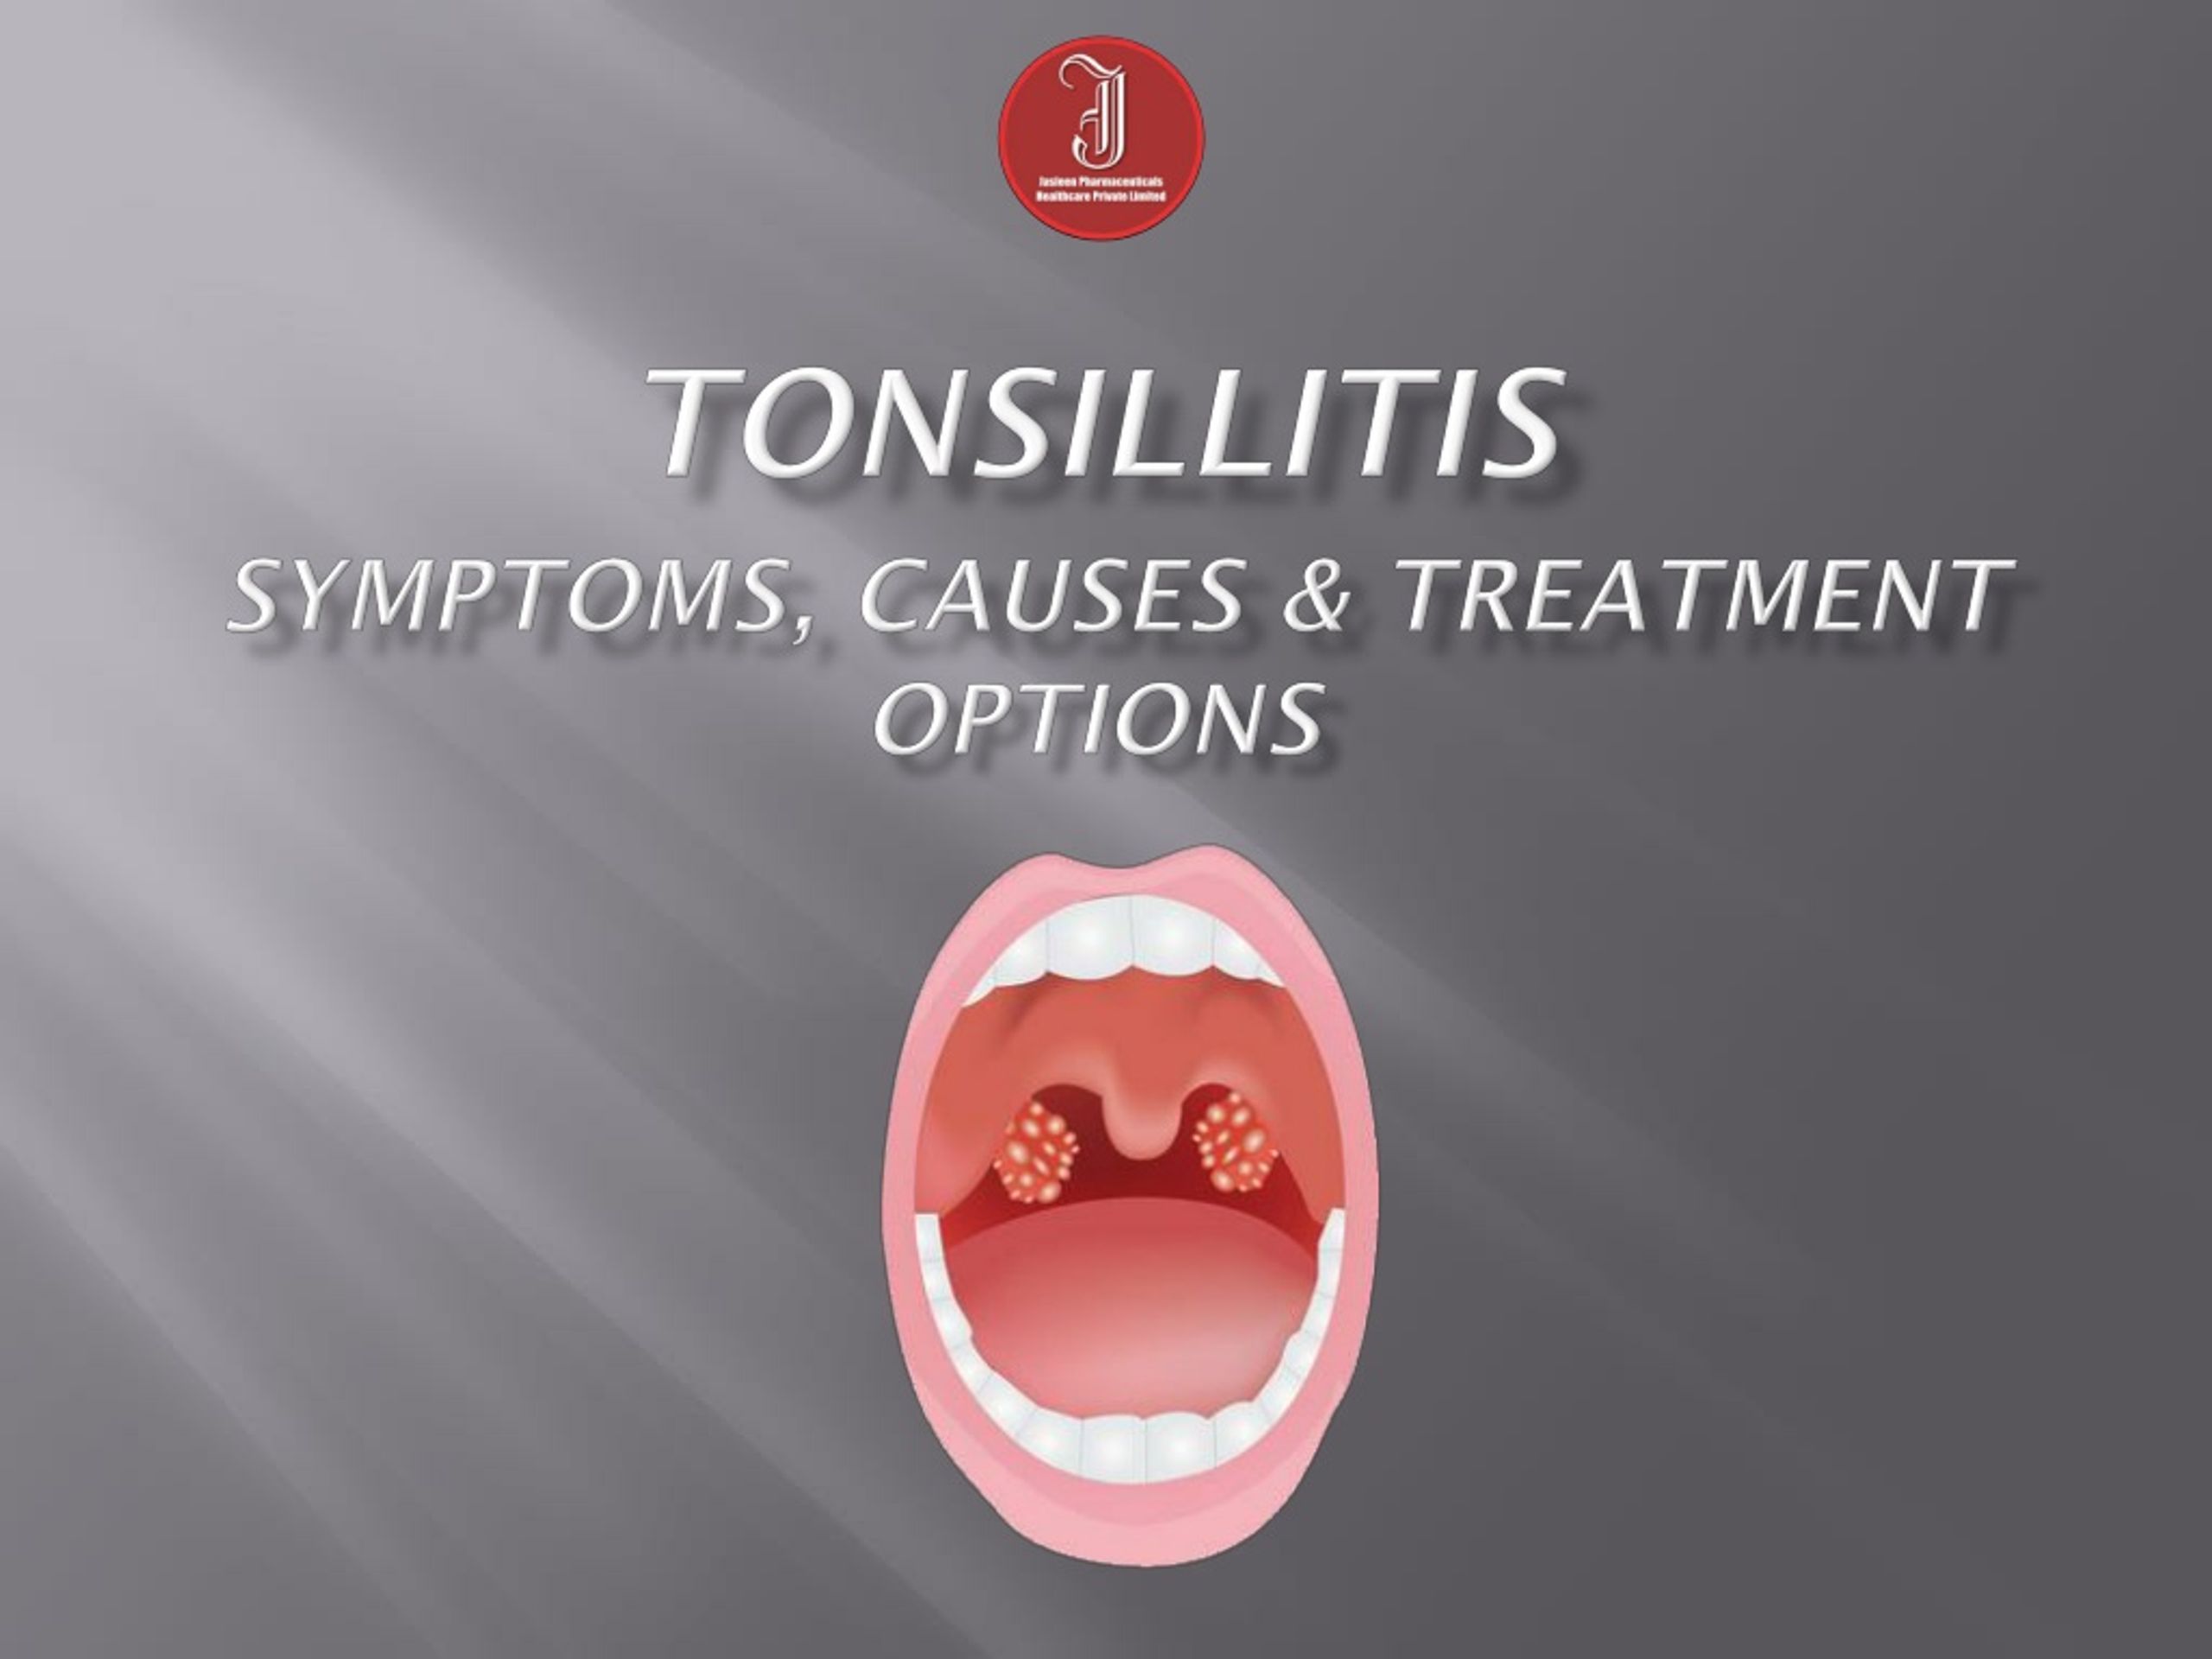 Ppt Tonsillitis Symptoms Causes And Treatment Options Powerpoint Presentation Id8495638